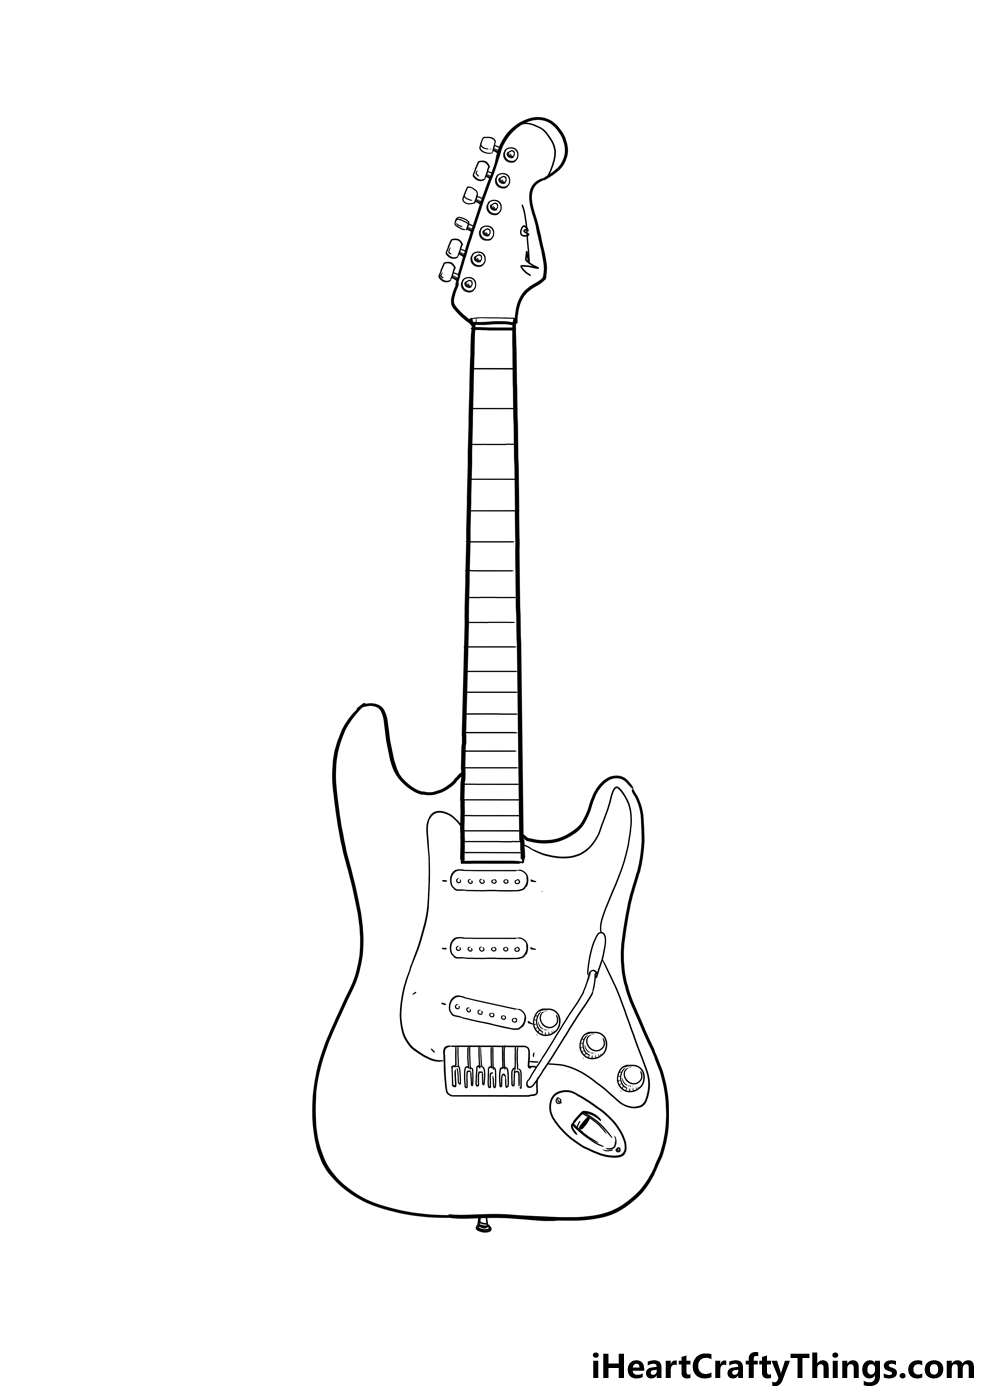 How to Draw An Electric Guitar step 4